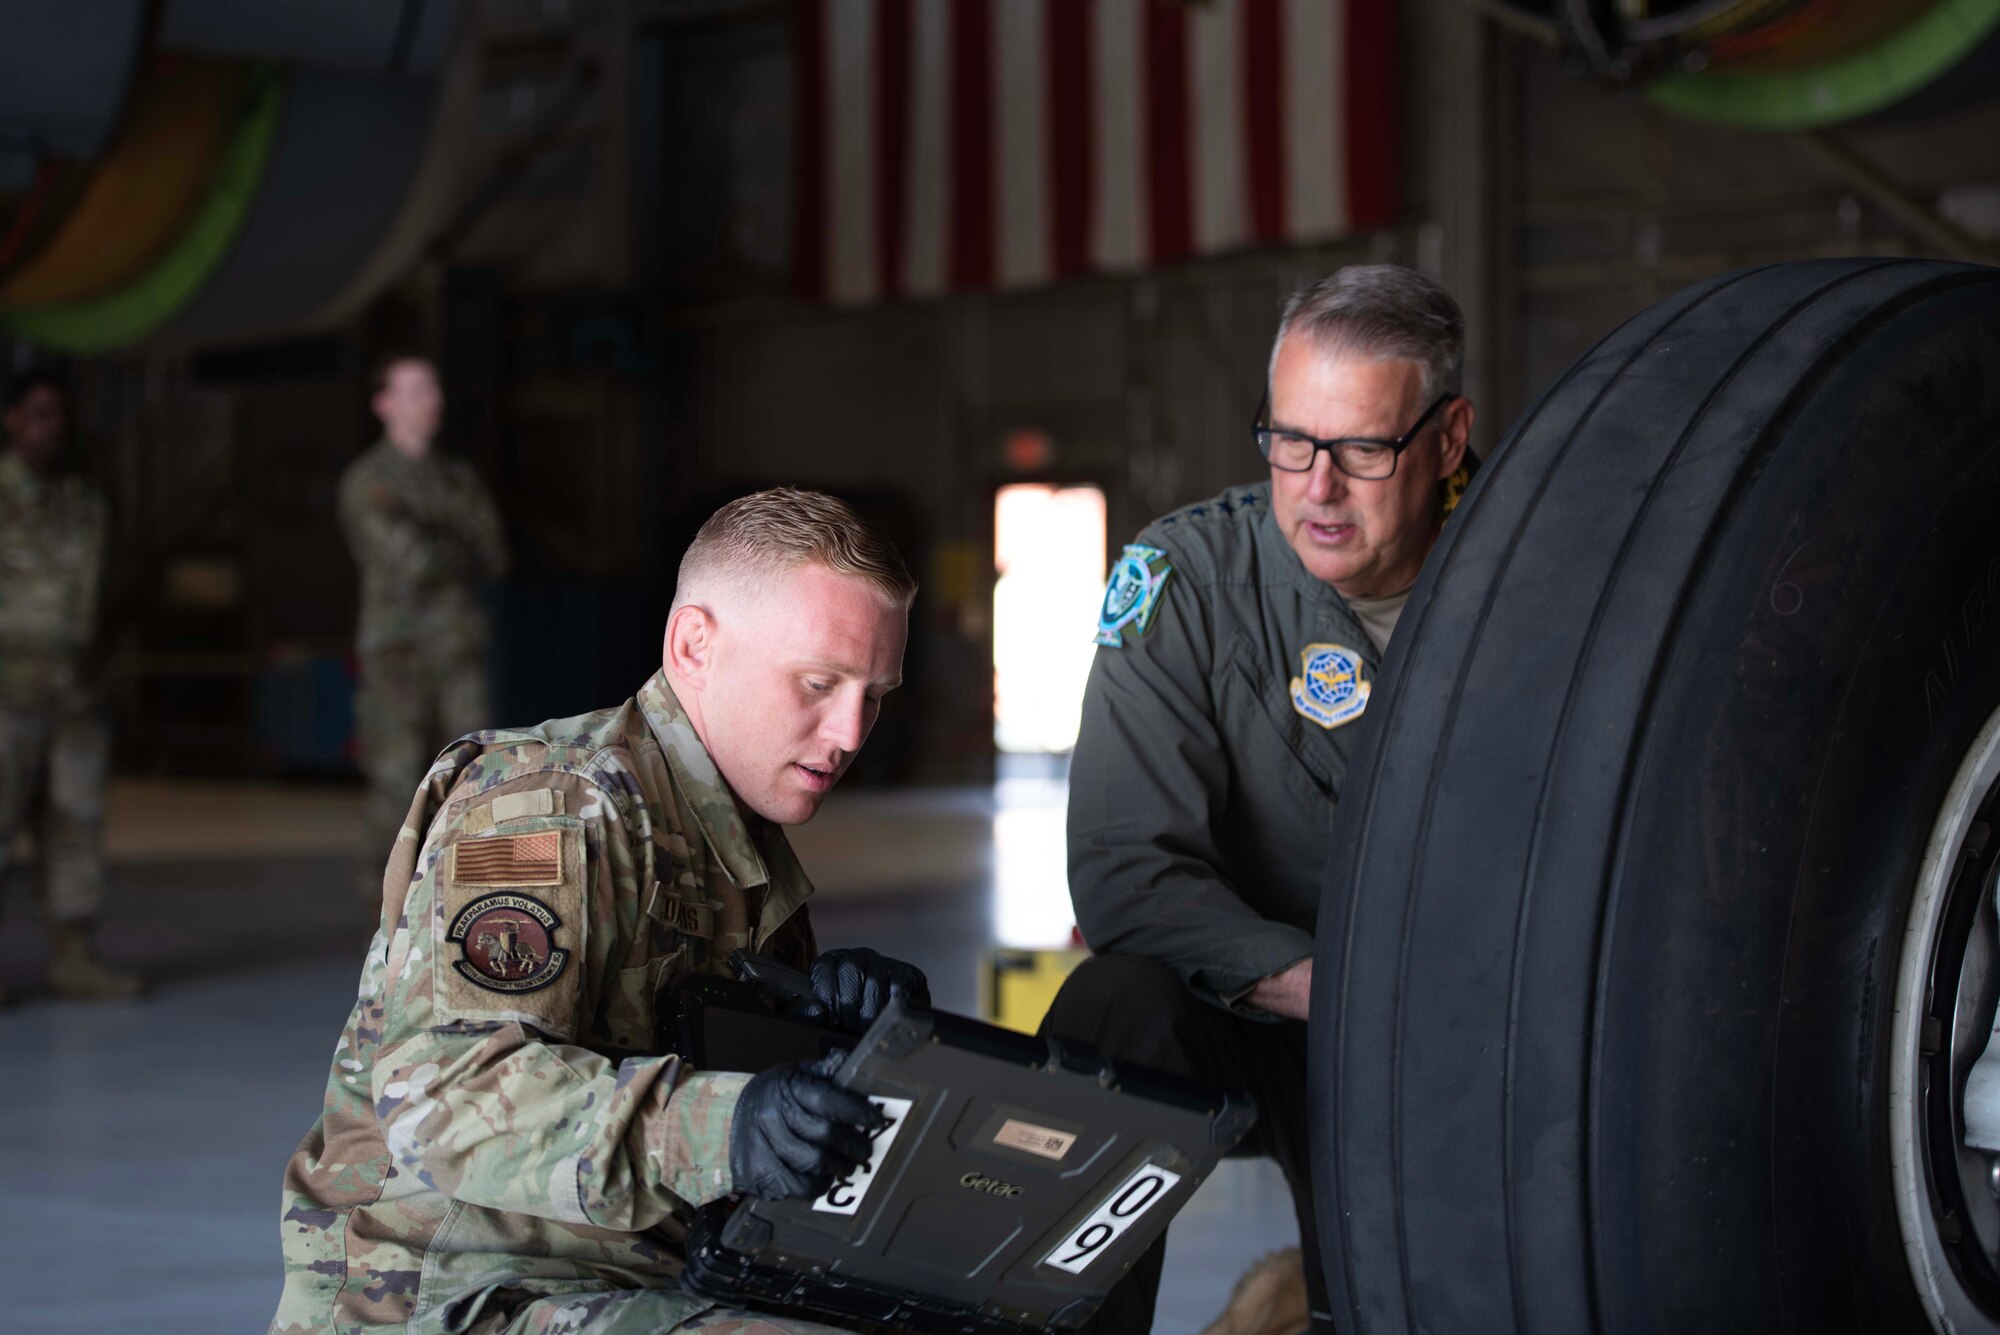 U.S. Air Force Senior Airman Oliver Davis, left, 60th Aircraft Maintenance Squadron C-5M Super Galaxy home station check journeyman, and Gen. Mike Minihan, Air Mobility Command commander, change a tire on a C-5M during a visit amidst Mobility Guardian 2023 at Travis Air Force Base, California, July 11, 2023. Mobility Guardian 2023 is designed to deepen our connections with regional Allies and partners while testing the Mobility Air Force’s large-force, agile combat employment, humanitarian assistance, and disaster relief capabilities in contested, degraded, and operationally-limited environments spanning over 3,000 miles. (U.S. Air Force photo by Senior Airman Alexander Merchak)